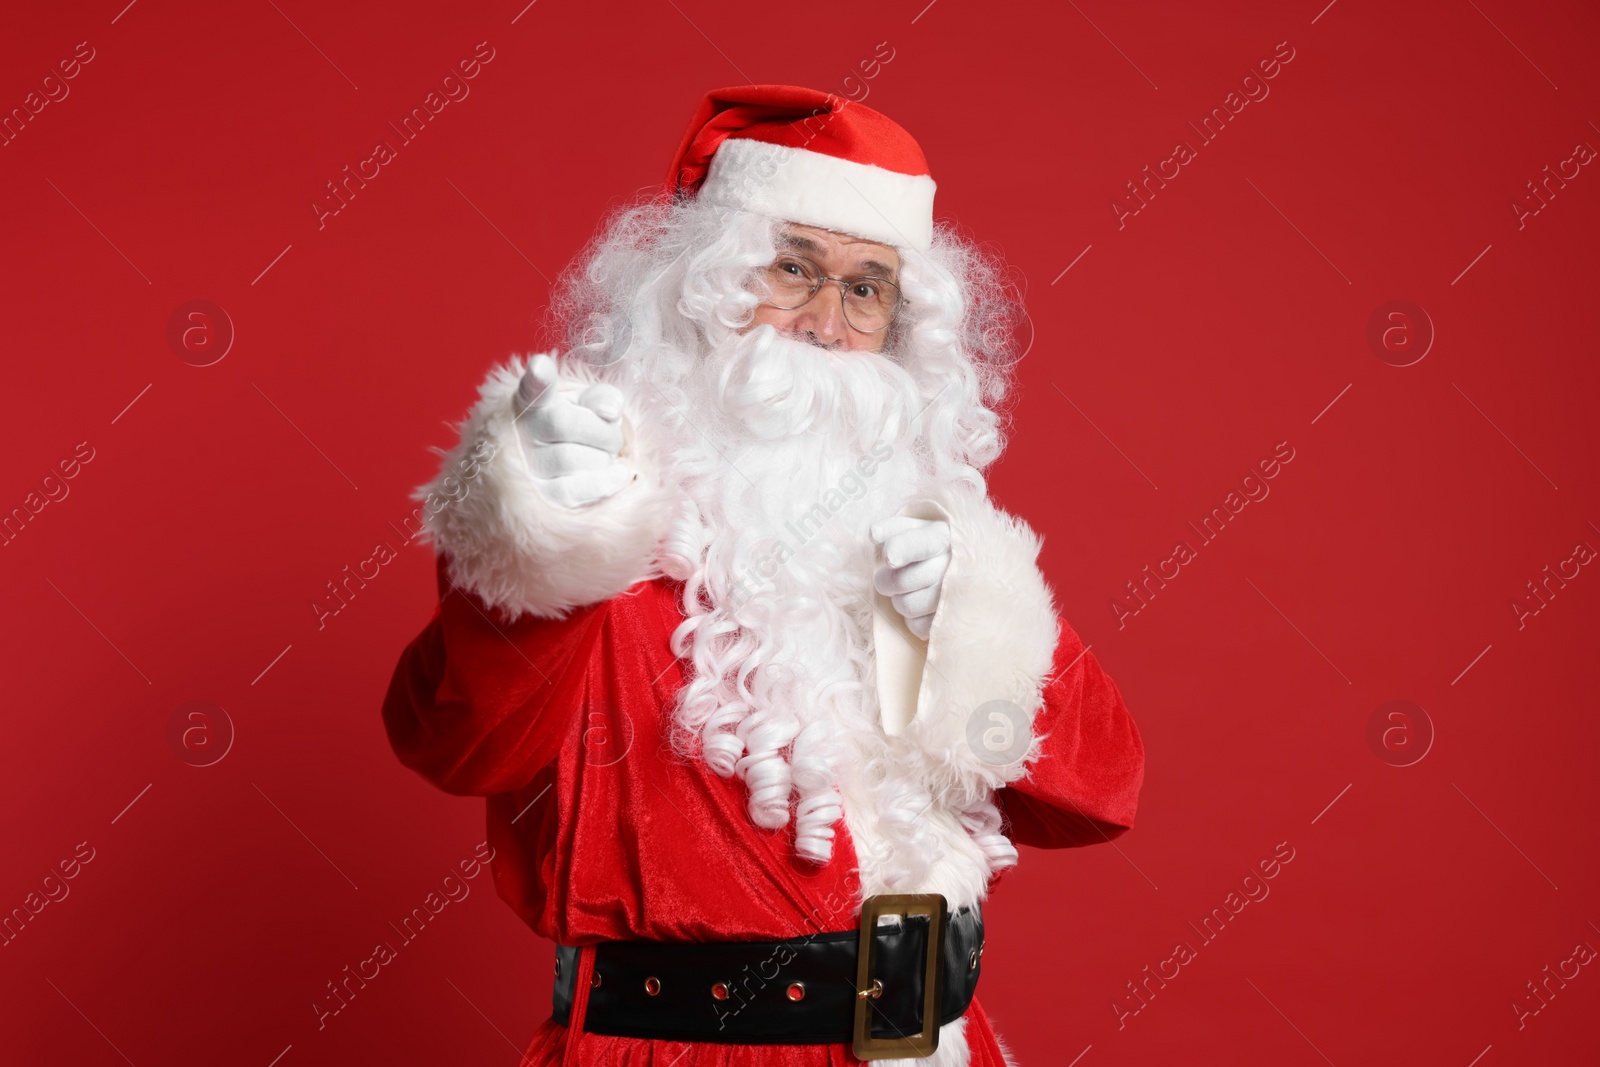 Photo of Merry Christmas. Santa Claus pointing at something on red background